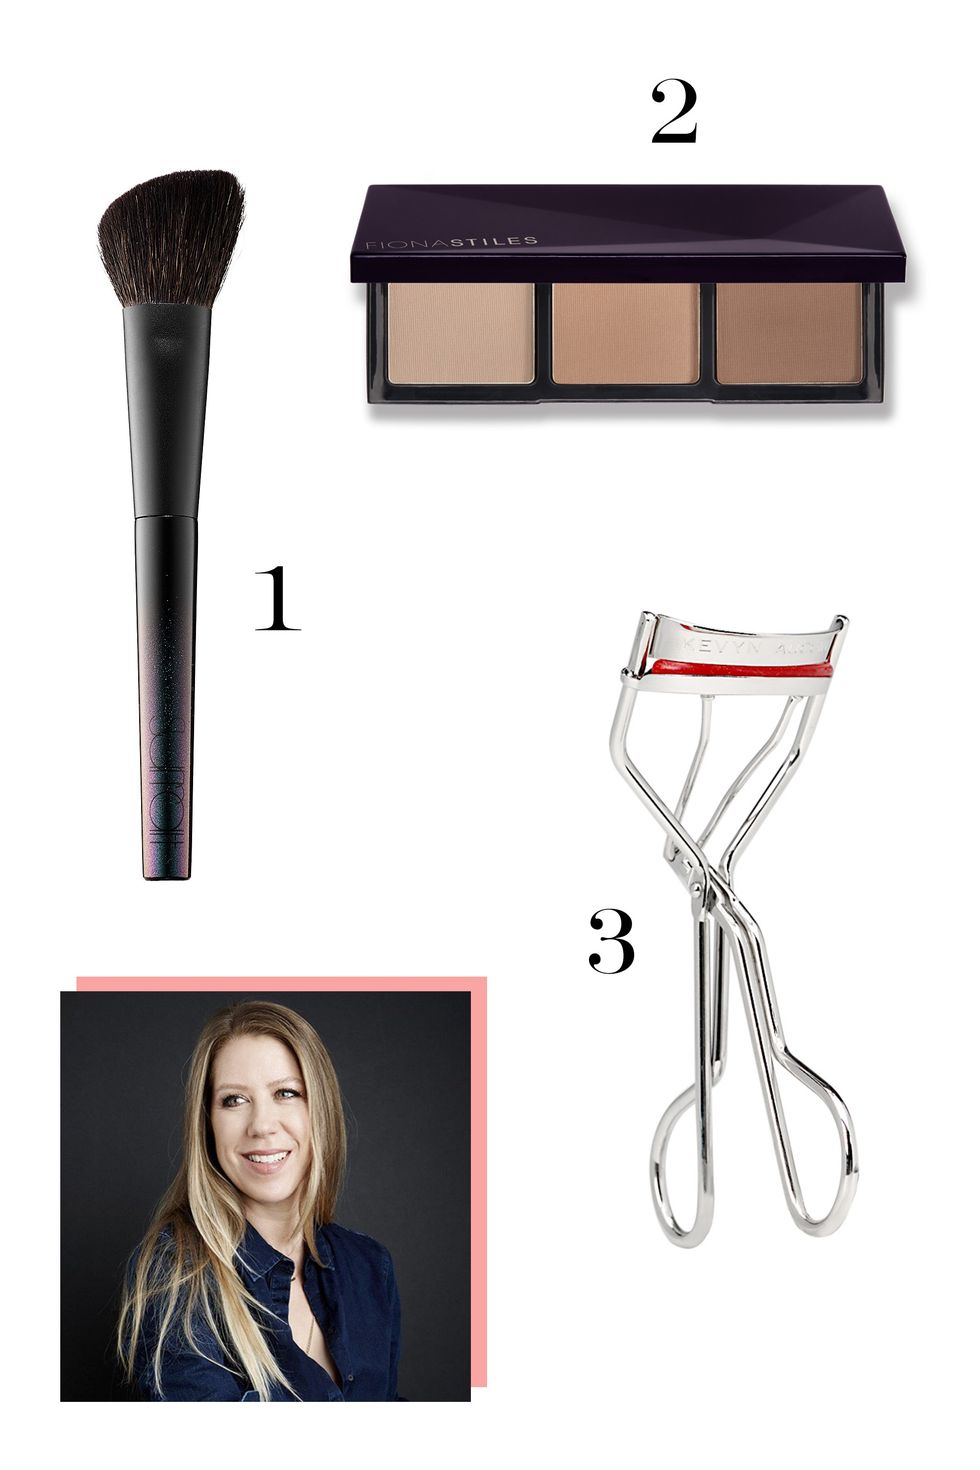 <p><strong>Who She's Worked With: </strong>Gwyneth Paltrow, Natalie Portman, Elizabeth Banks, Jennifer Garner</p><p><strong>1. </strong>"Surratt brushes are so incredible, especially the sculpting brush. They're perfectly weighted,  expertly shaped and just the right mix of soft and firm. They're always the first brush I reach for."</p><p><strong>Surratt Beauty Artisque Sculpting Brush, $90; <a href="http://bit.ly/28SIo6s" target="_blank">sephora.com</a>.</strong></p><p><br></p><p><strong>2. </strong>"I use this pretty much every time I work. The payoff is so sheer that it's totally believable and natural looking. It's a game changer for sculpting."</p><p><strong>Fiona Stiles Sheer Sculpting Palette, $28; <a href="http://bit.ly/28SVTPM" target="_blank">ulta.com</a>.</strong></p><p><br></p><p><strong>3. </strong>"I almost always curl a clients lashes and this one is the one. I always come back to. It makes a person look more awake than a venti latte."</p><p><strong>Kevyn Aucoin Eyelash Curler, $21; <a href="http://bit.ly/28SKVhc" target="_blank">nordstrom.com</a>.</strong></p>